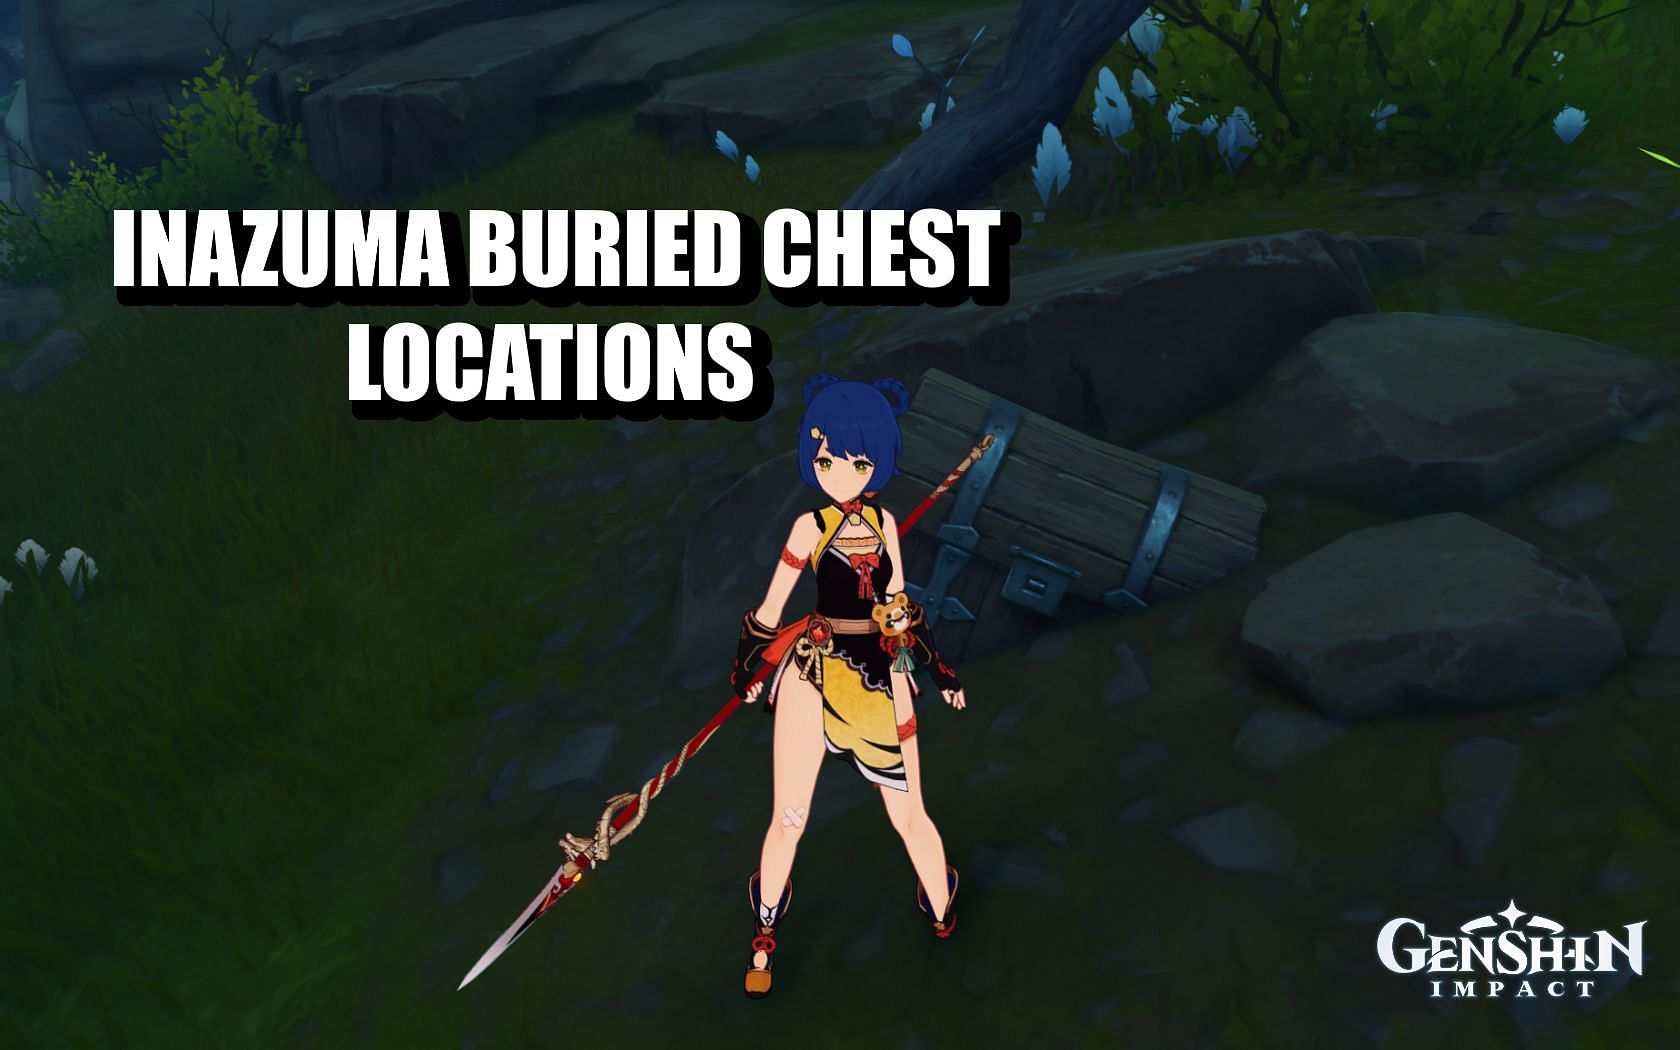 There are six chests in total (Image via Genshin Impact)